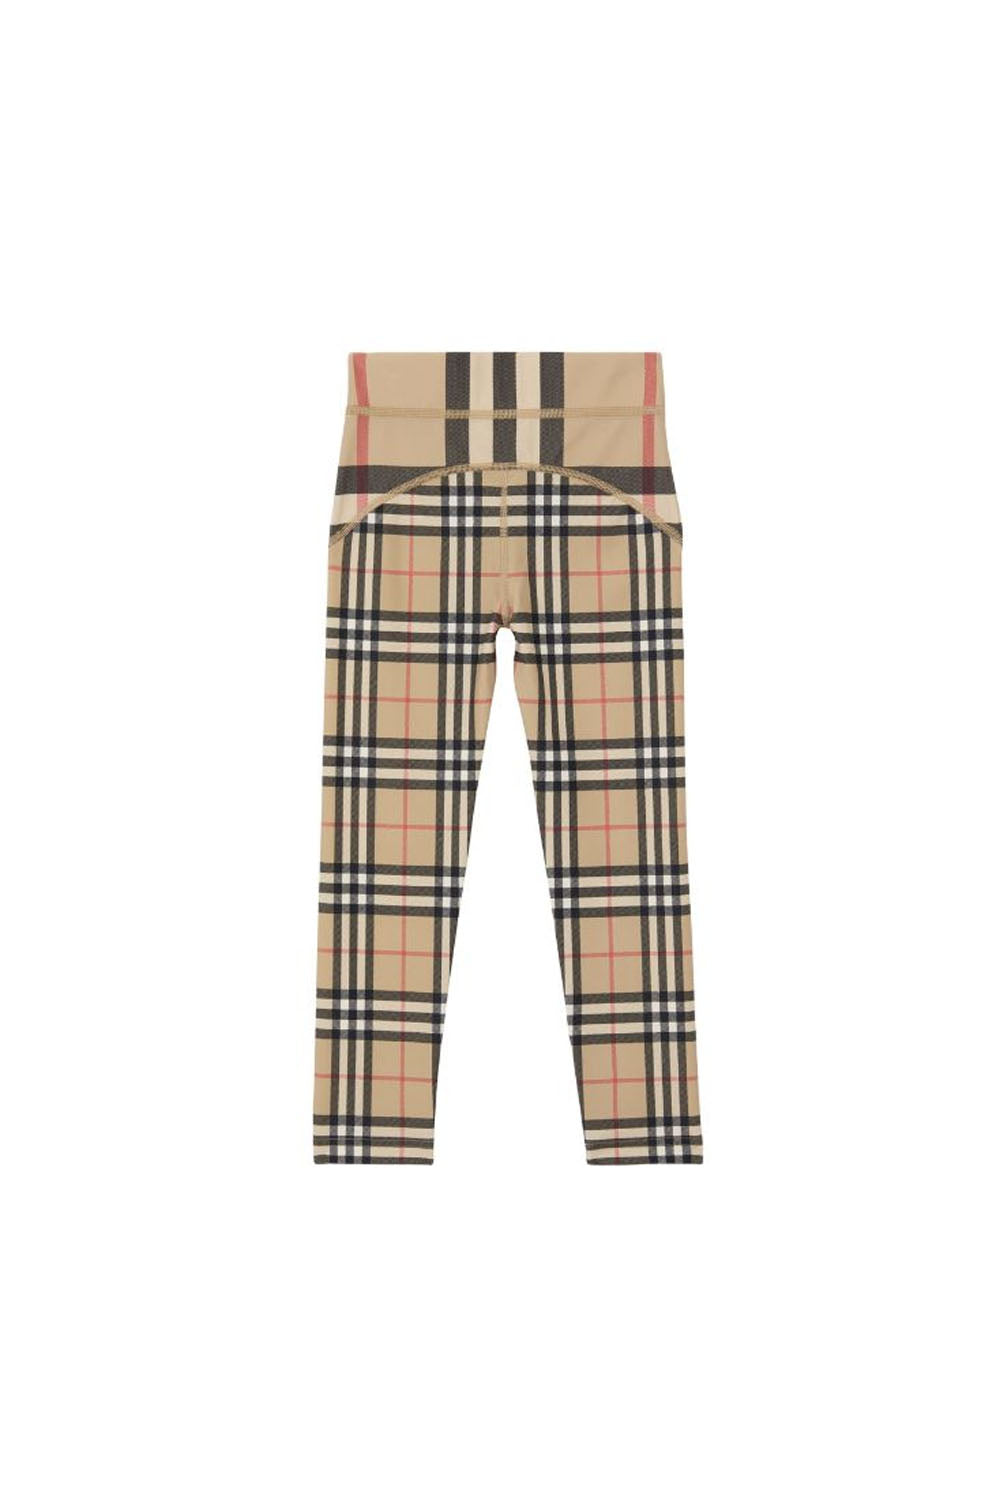 Trousers Isabella Check for Girls - Maison7